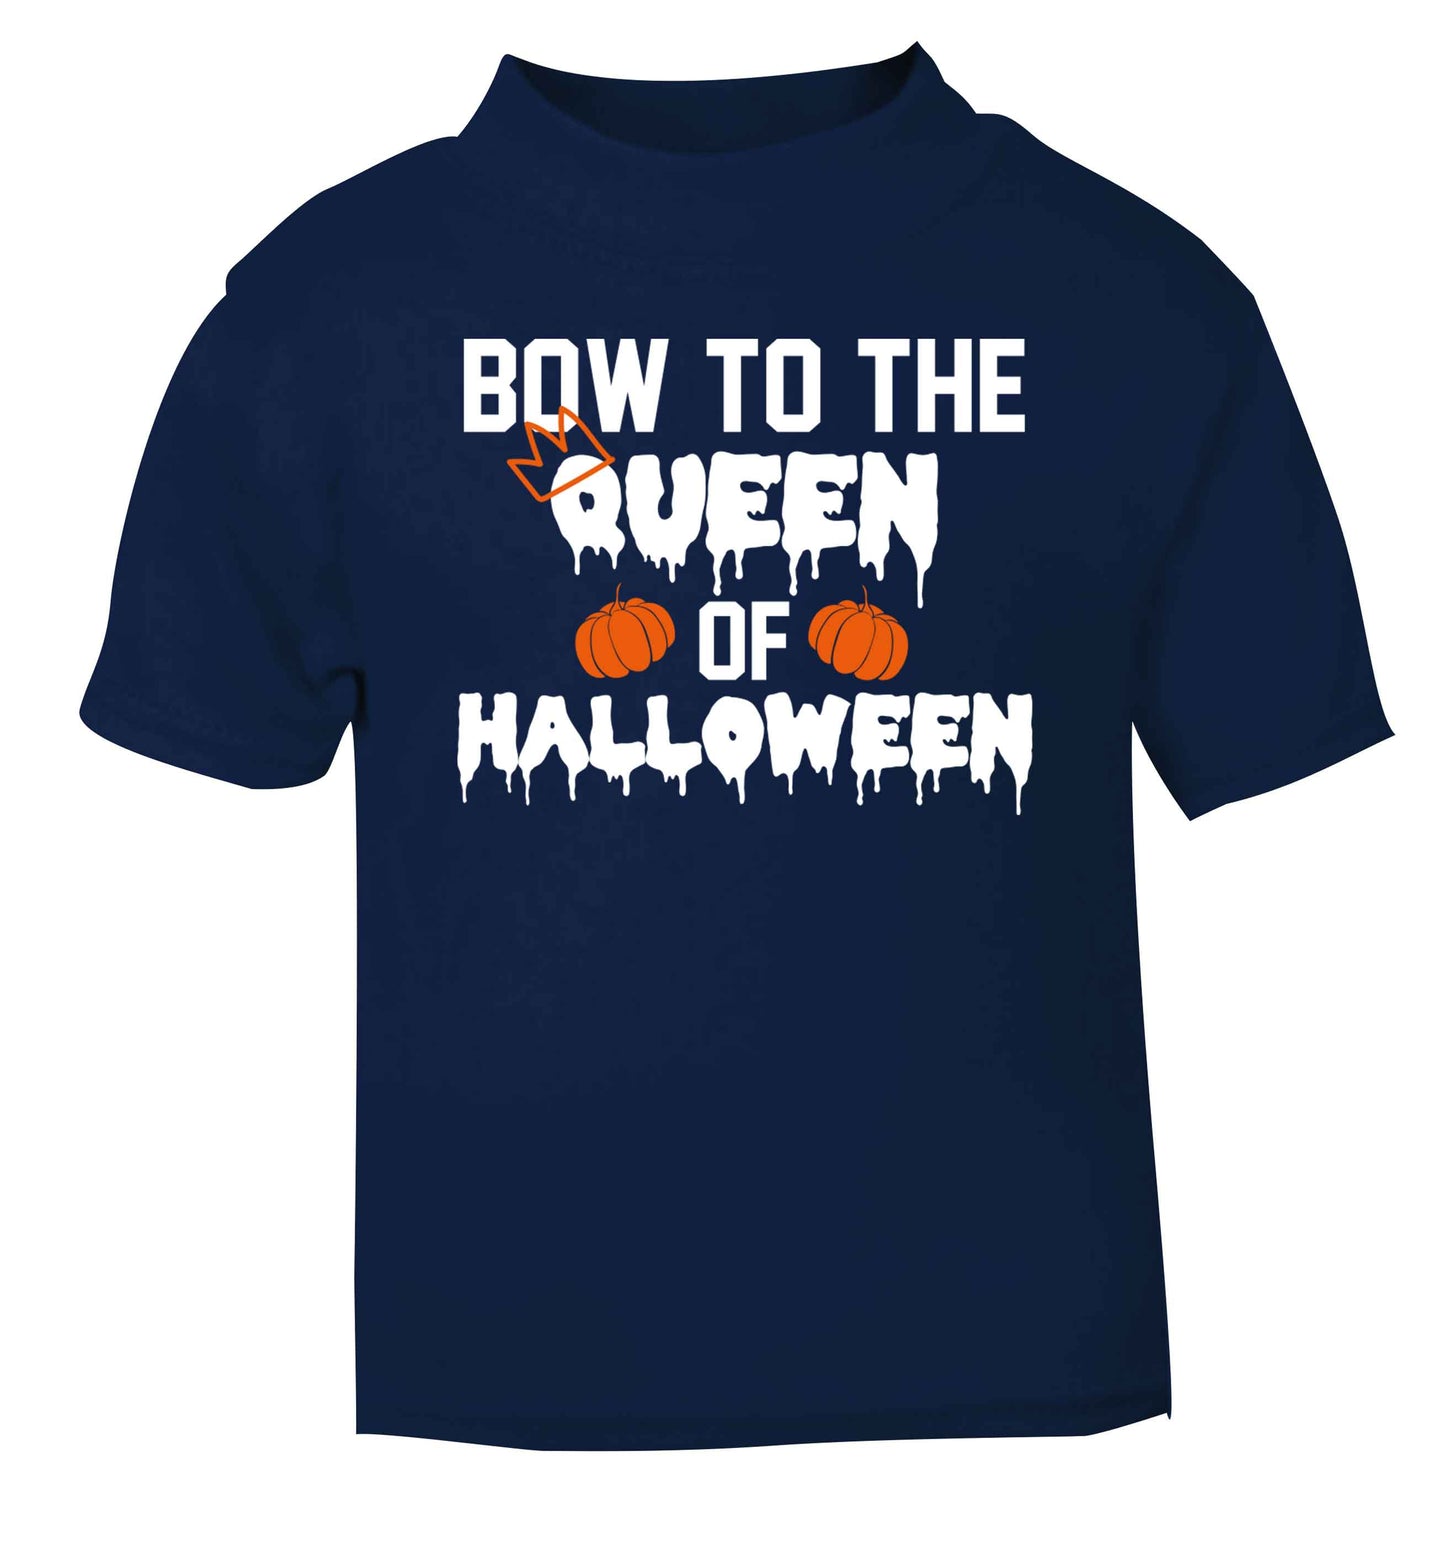 Bow to the Queen of halloween navy baby toddler Tshirt 2 Years